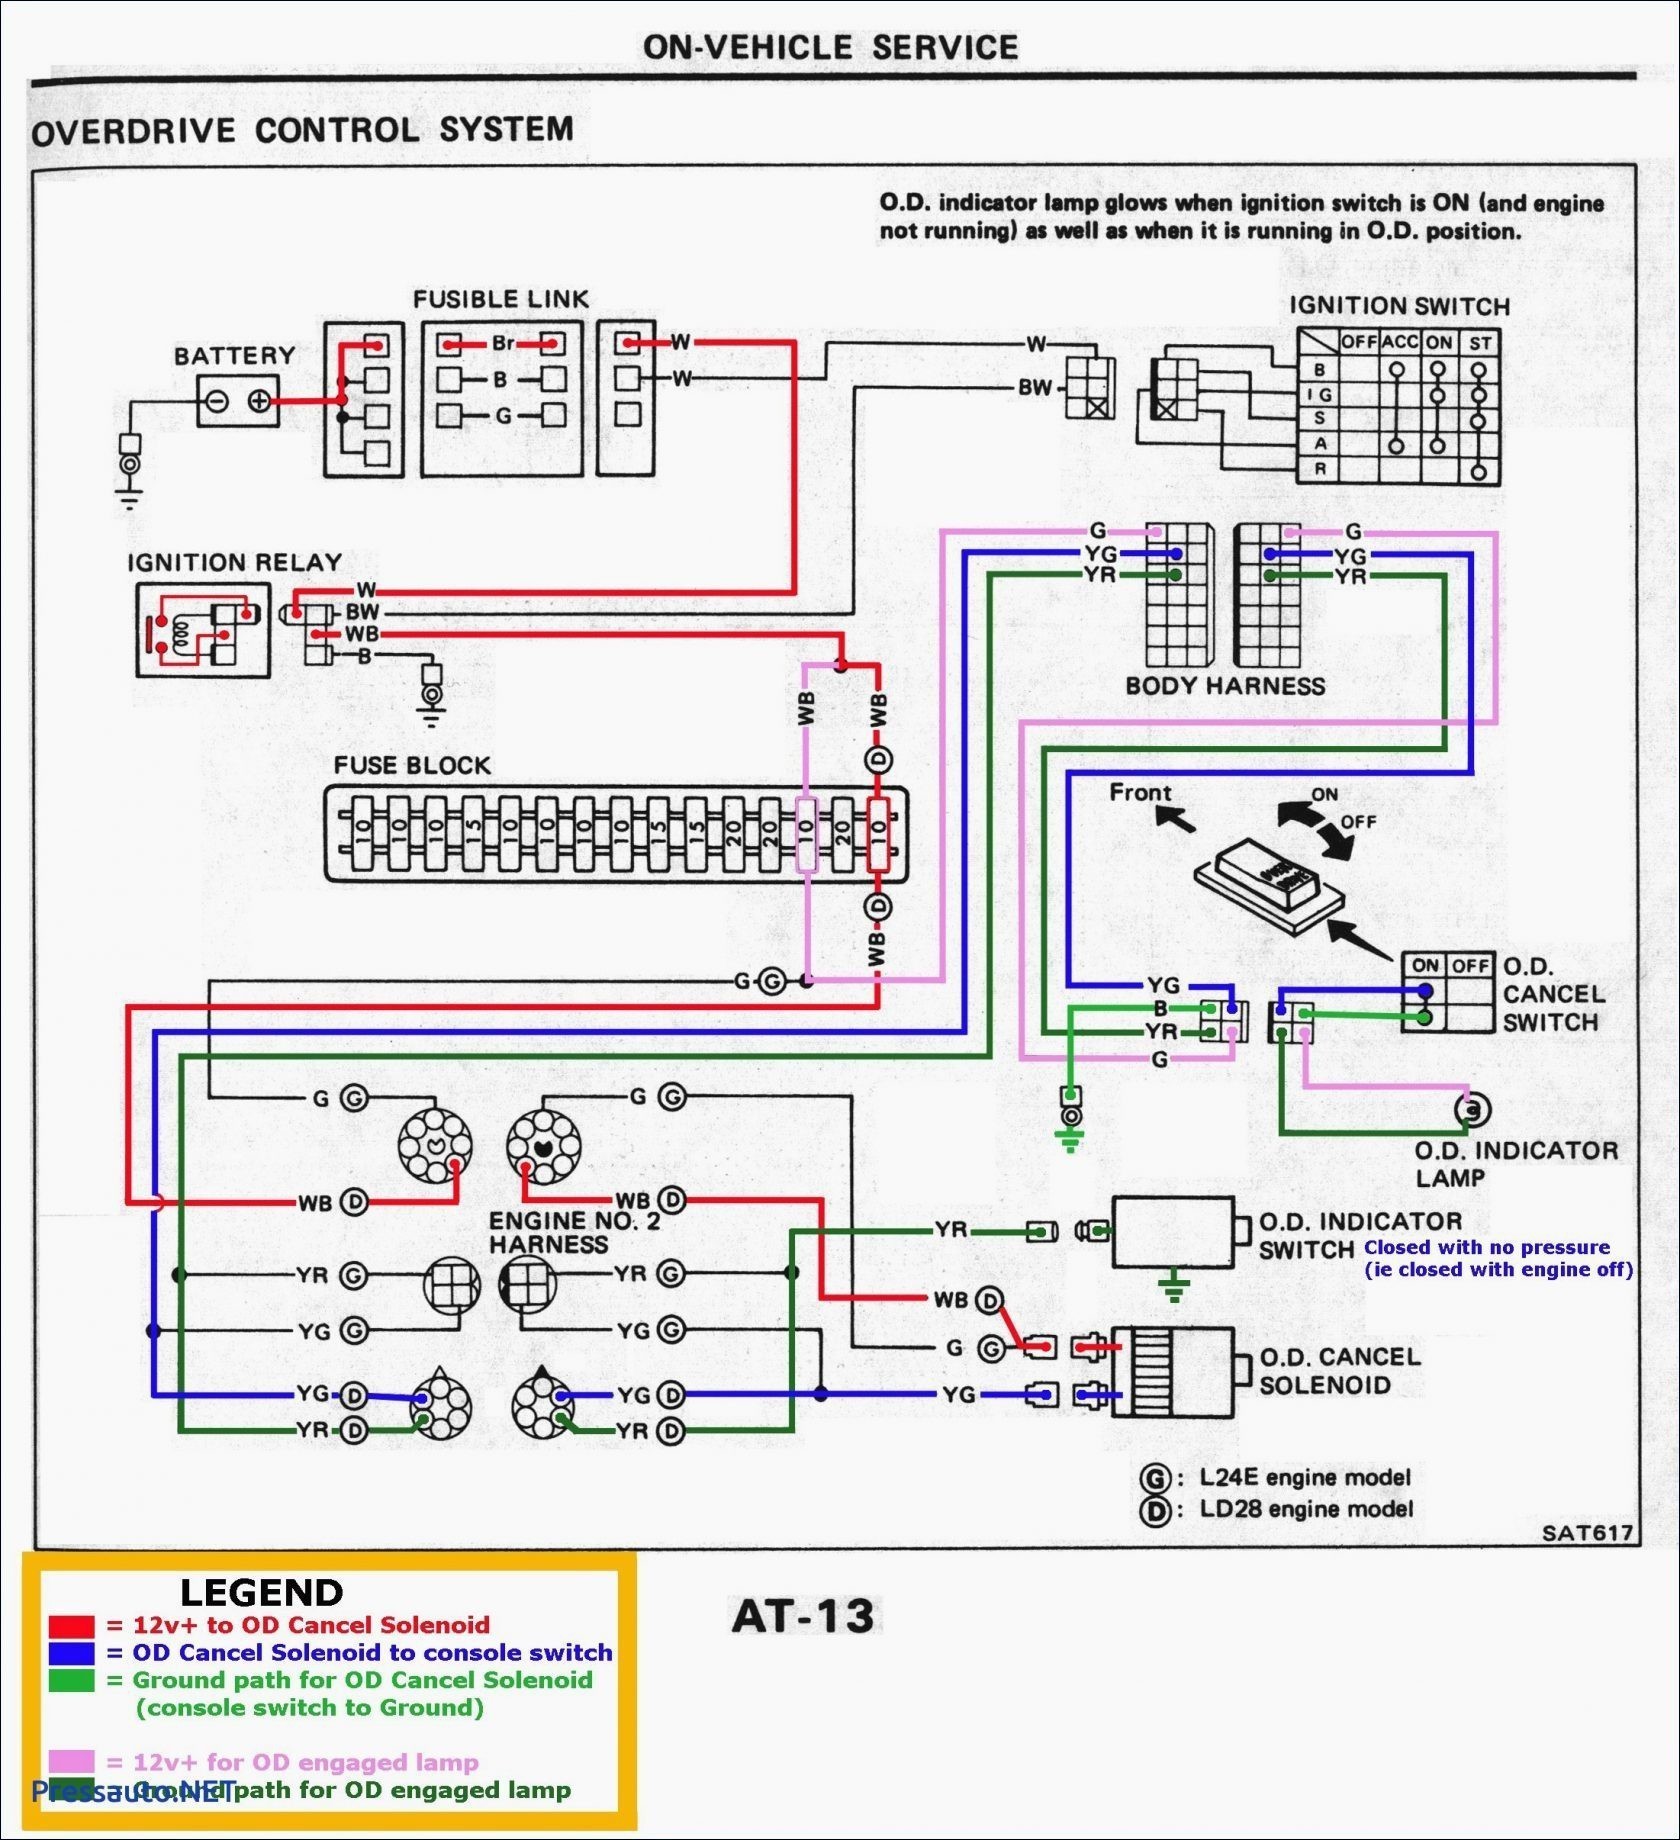 Directed Wiring Diagrams Reference Wiring Diagram For Ceiling Light Fan Fresh Wiring Diagram For Loop